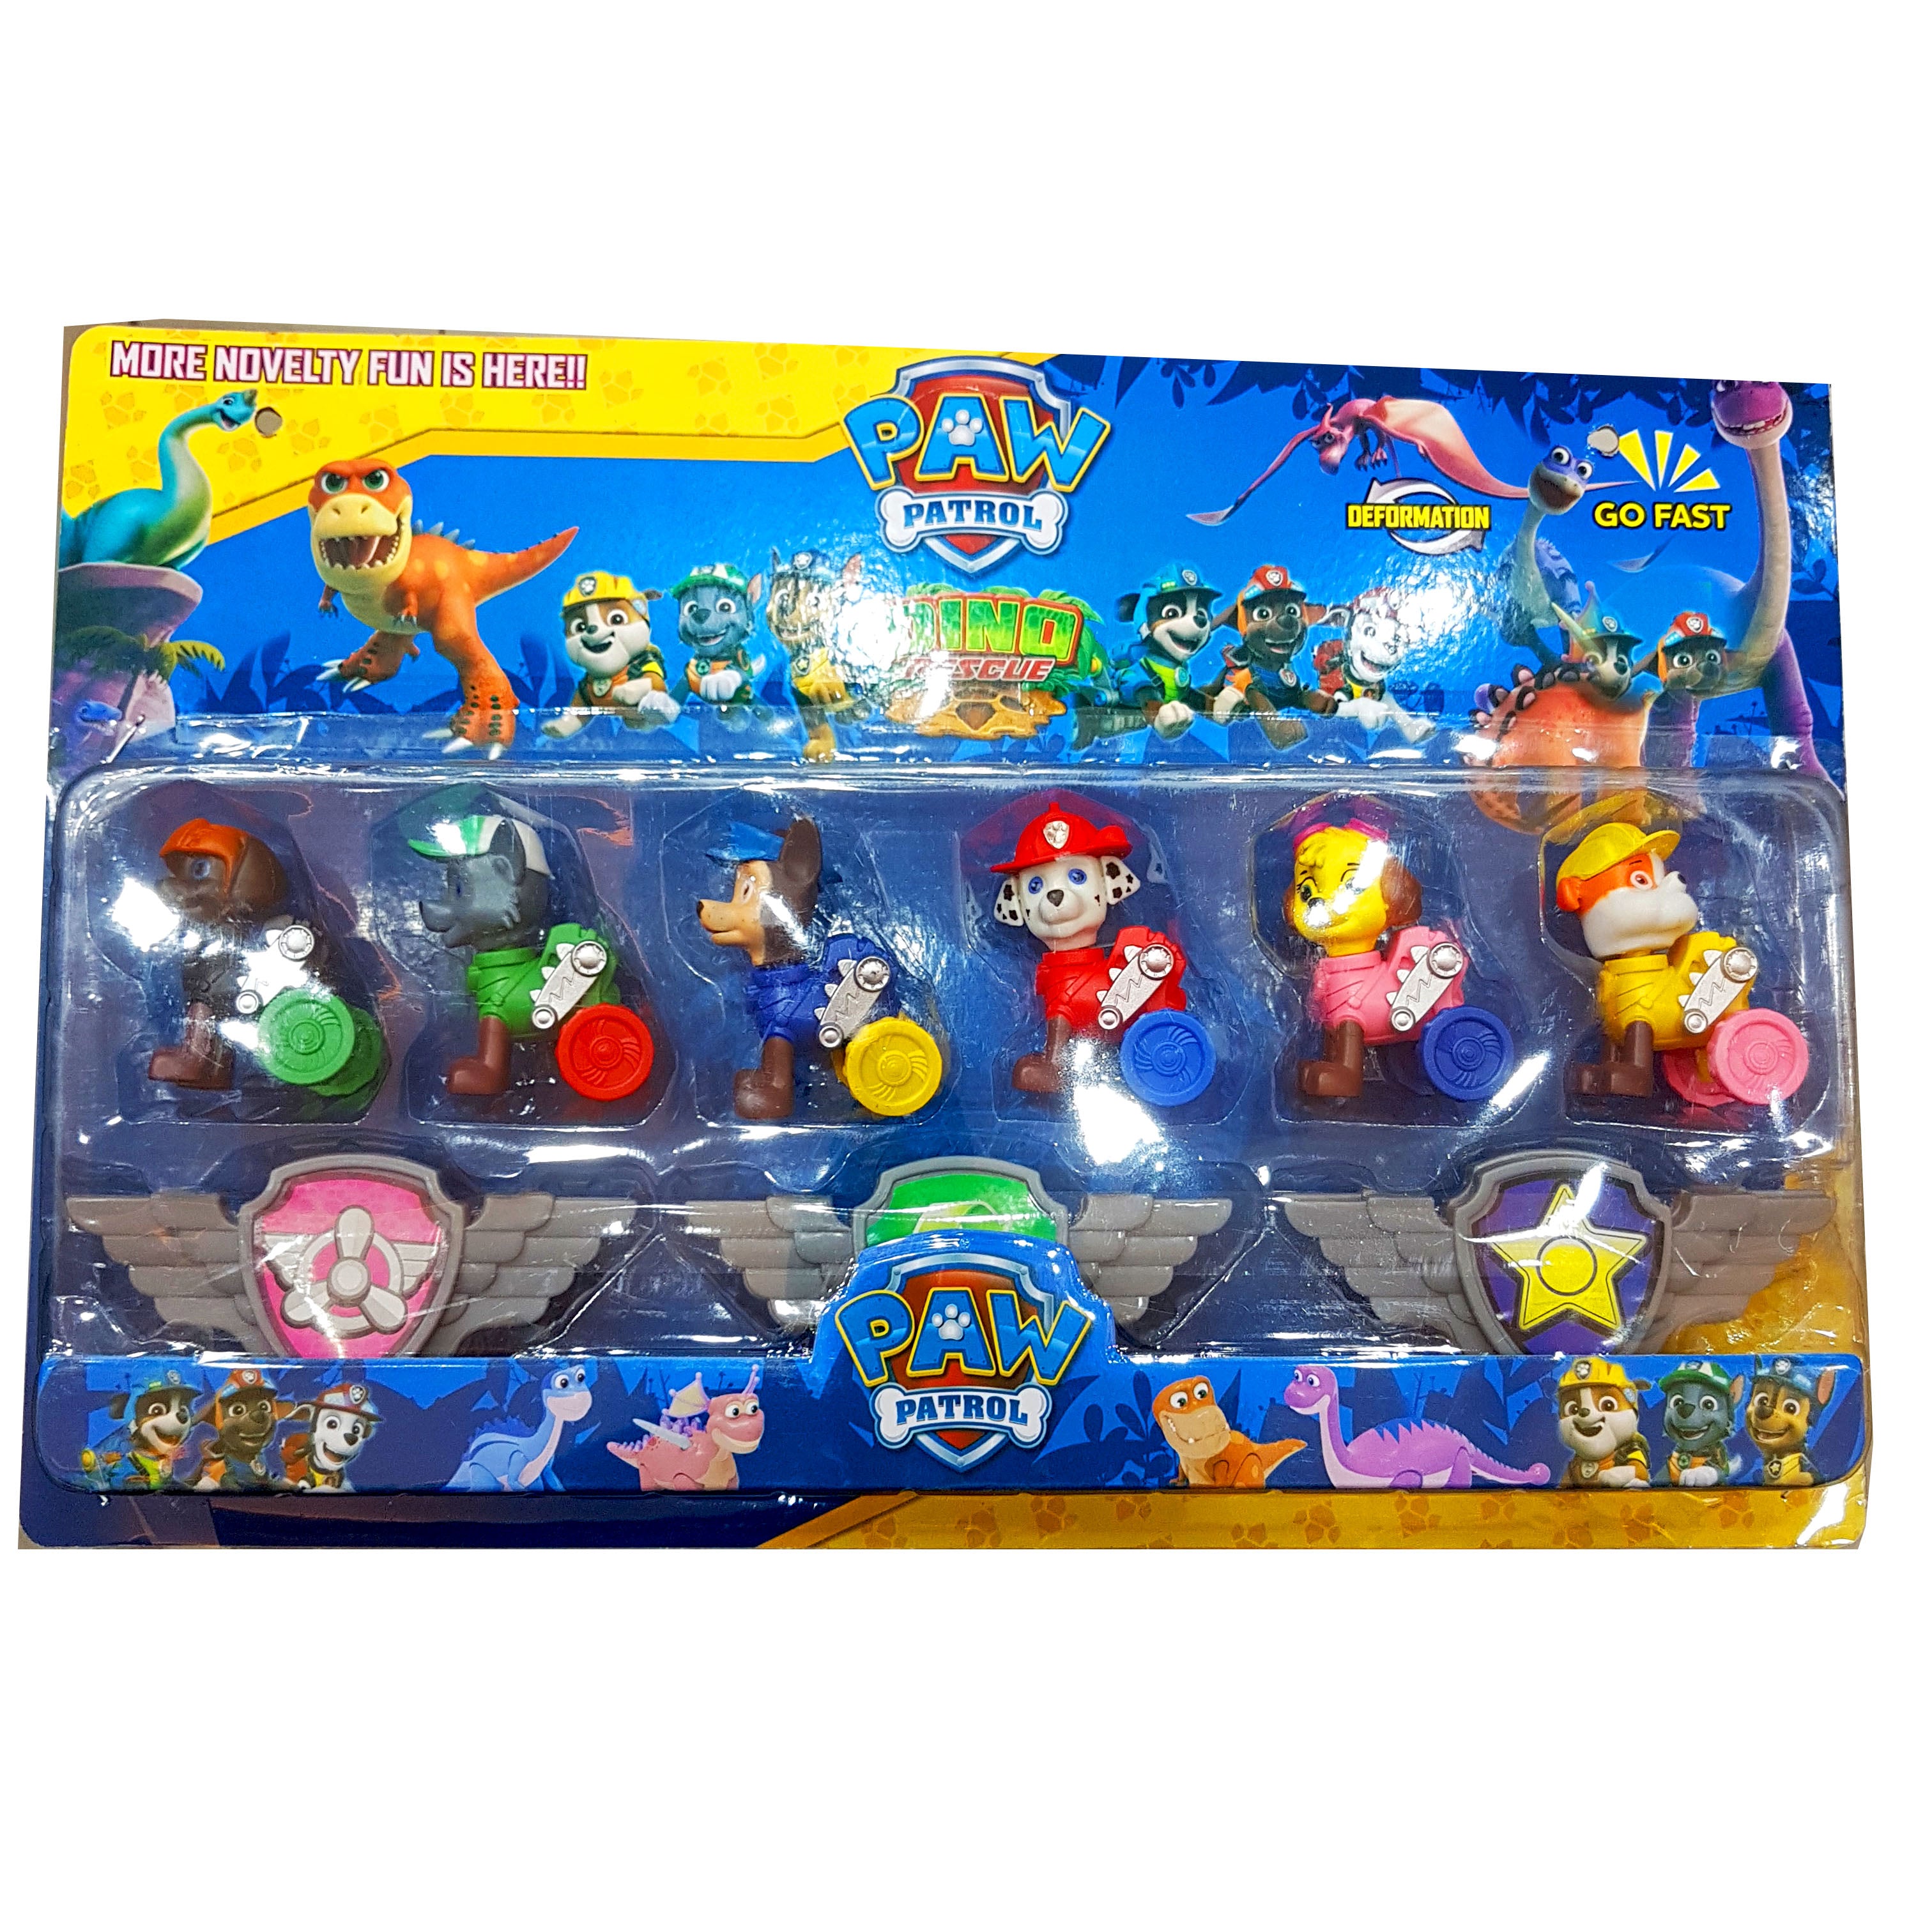 New Arrival: Paw Patrol Action Figure Set for Kids - 6 High-Quality, Movable Figures - Top Gift for Paw Patrol Enthusiasts, Best Seller